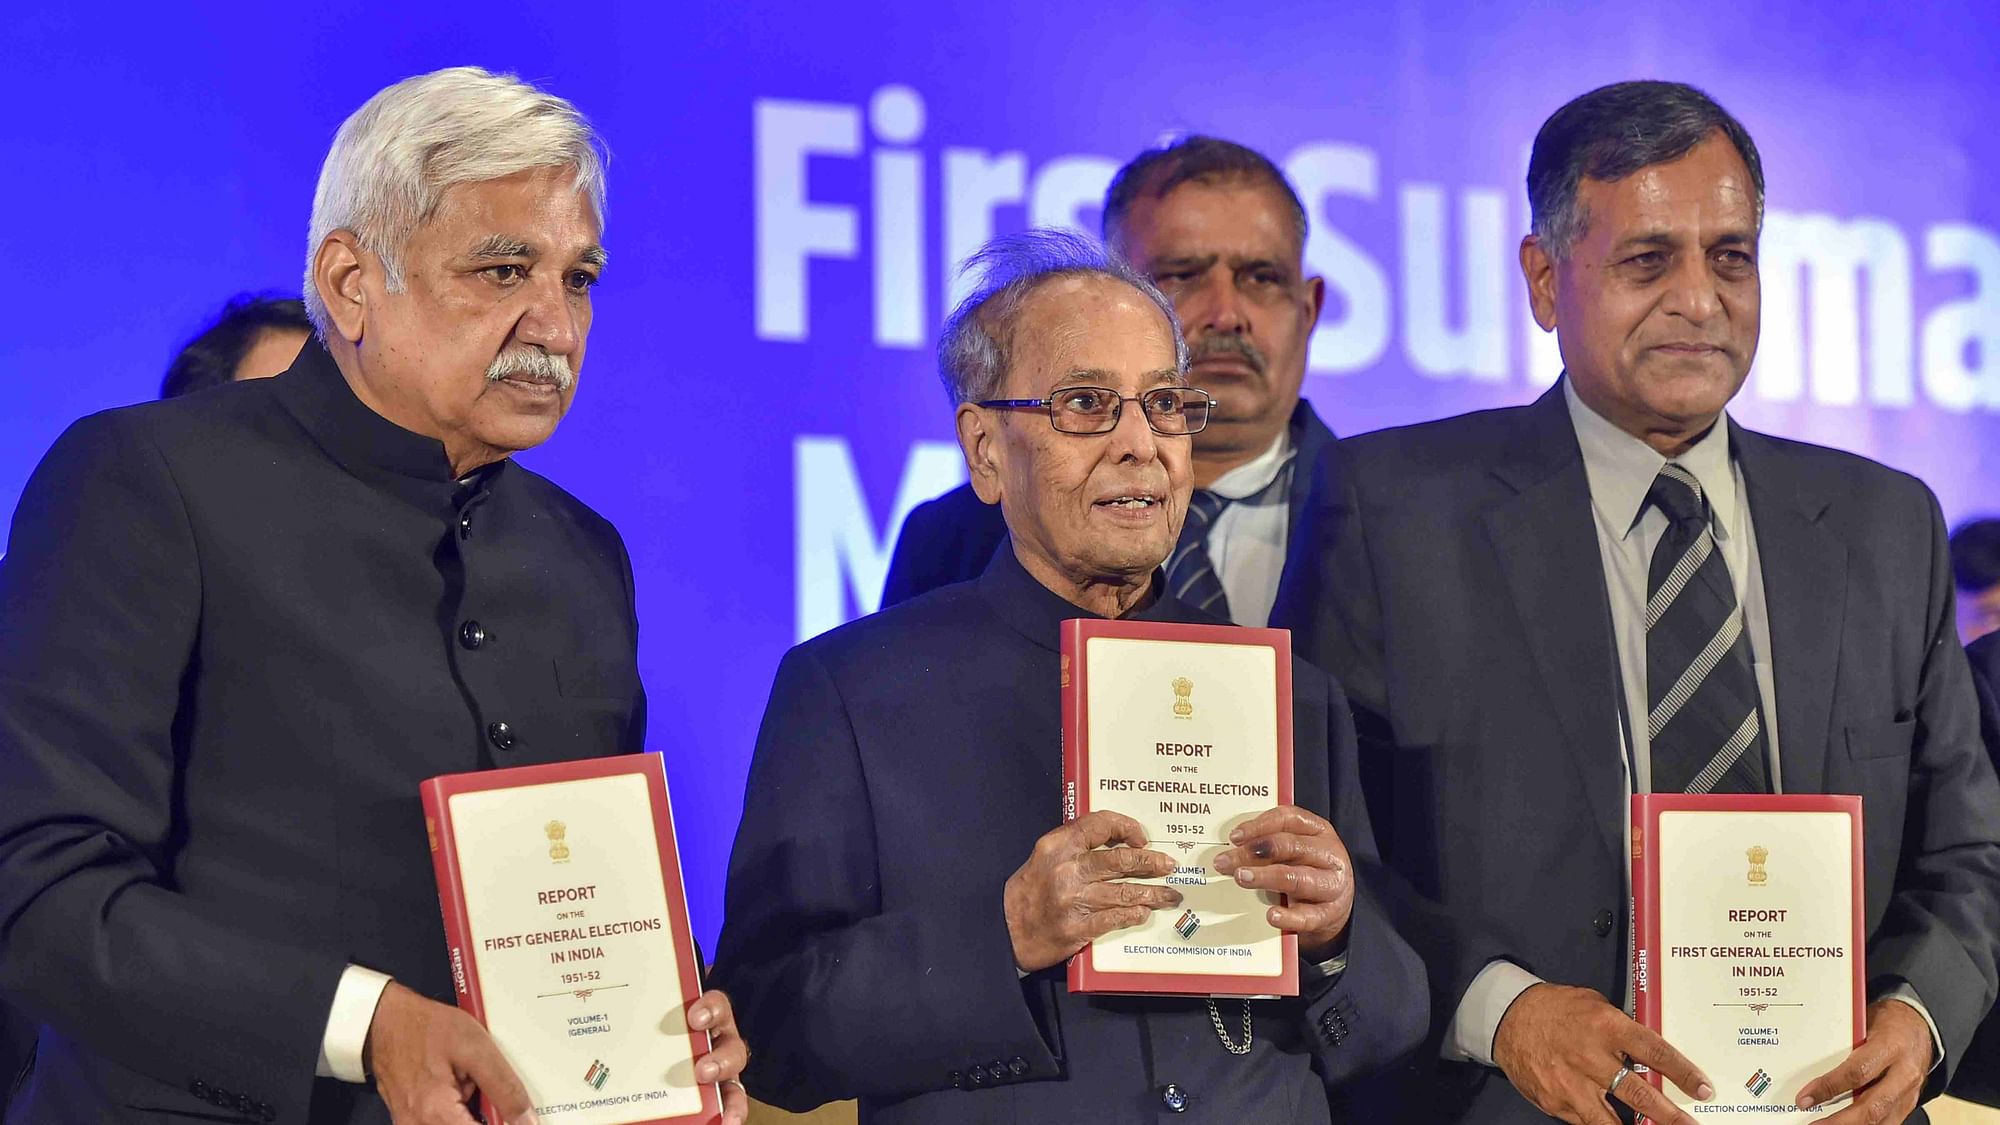 Former President Pranab Mukherjee with Chief Election Commissioner Sunil Arora and Election Commissioner Ashok Lavasa release a book in New Delhi on 23 January. &nbsp;